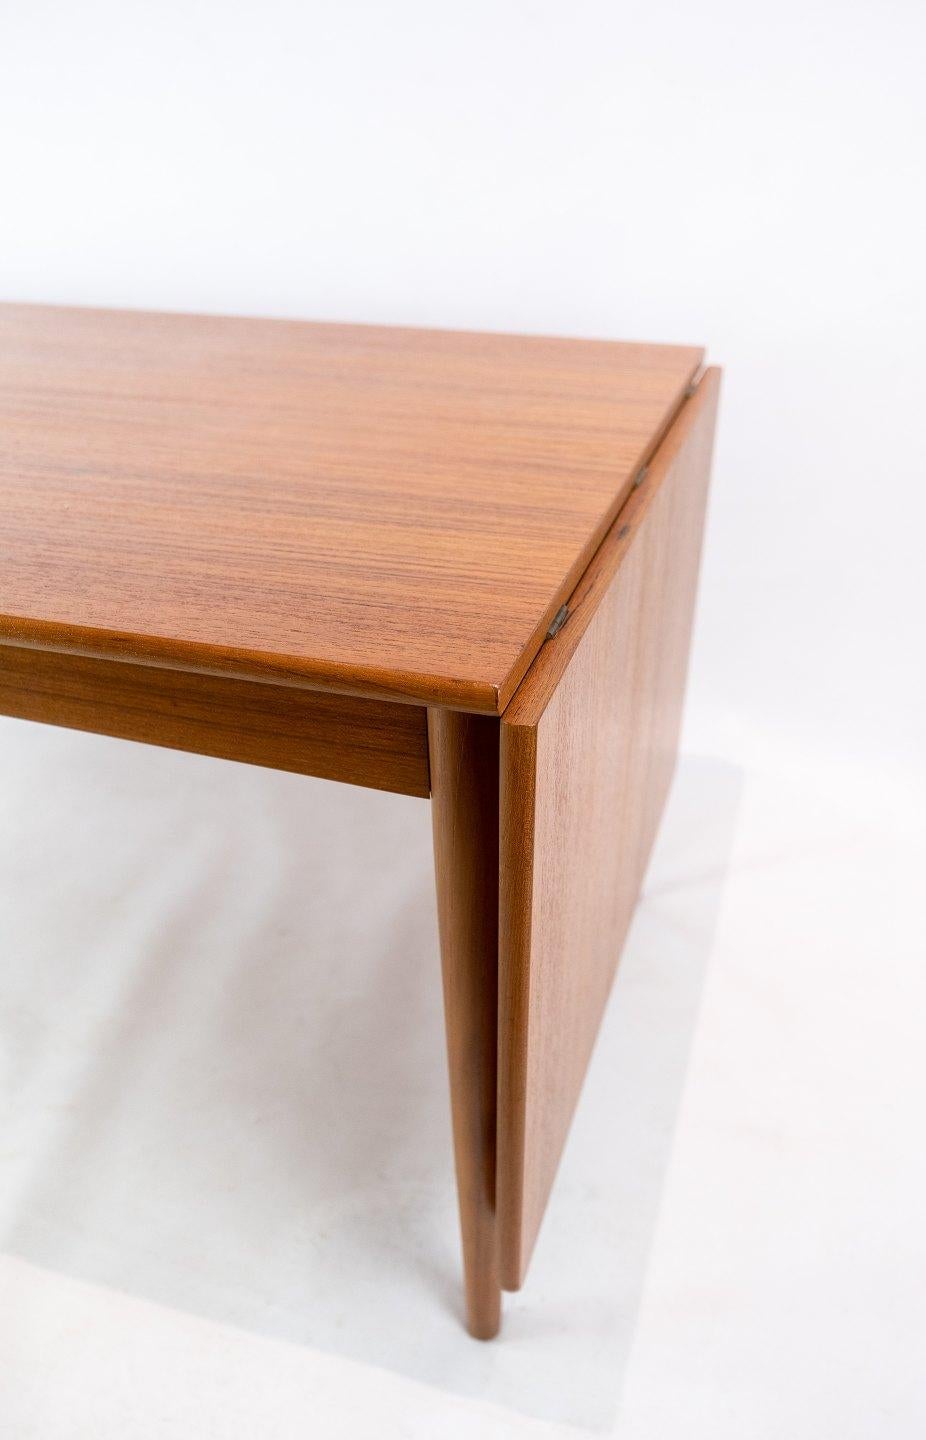 Coffee Table with Extension Leaf in Teak of Danish Design from the 1960s 1